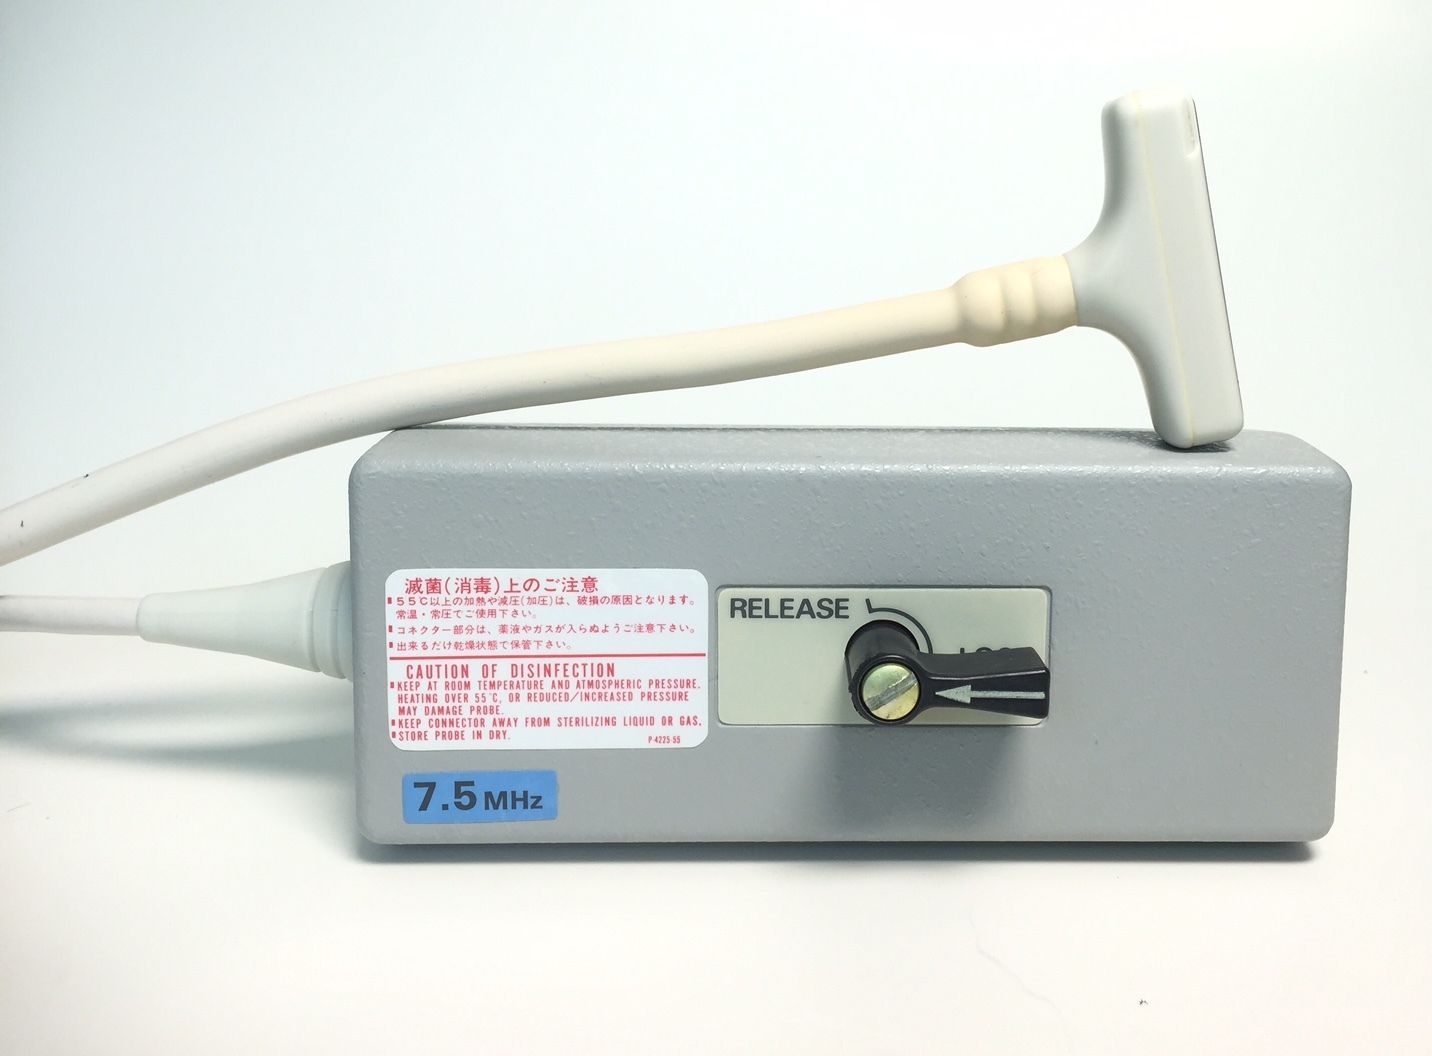 Aloka Medical Ultrasound Sector Linear Probe 7.5MHz UST-5514DTU-7.5 MHz.Used DIAGNOSTIC ULTRASOUND MACHINES FOR SALE